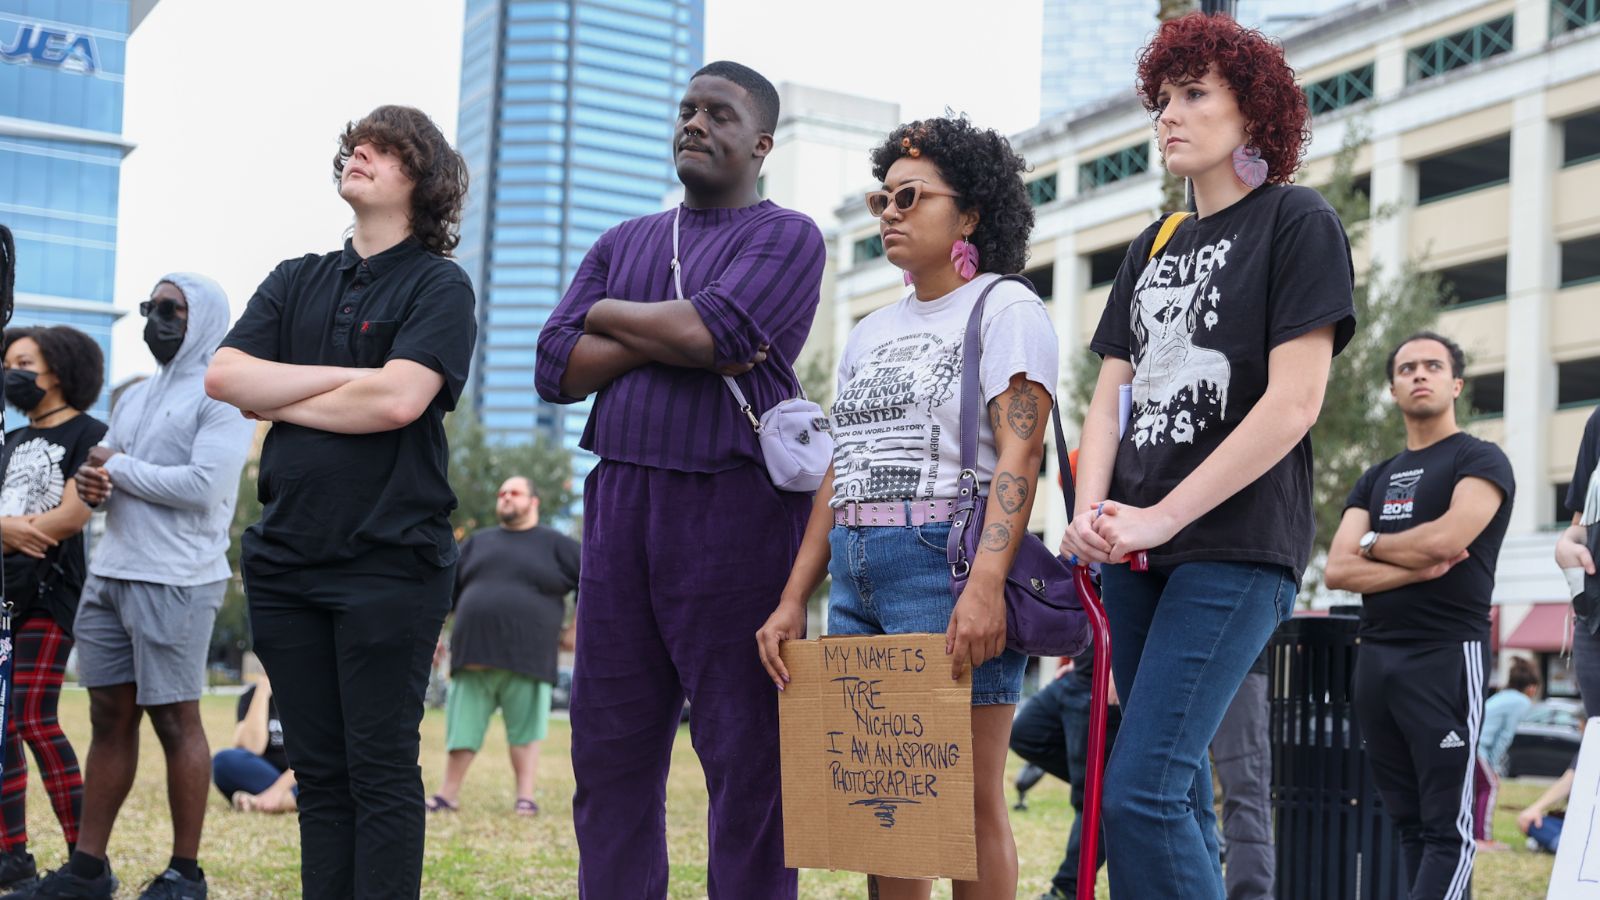 Featured image for “Activists rally for oversight of Jacksonville police”